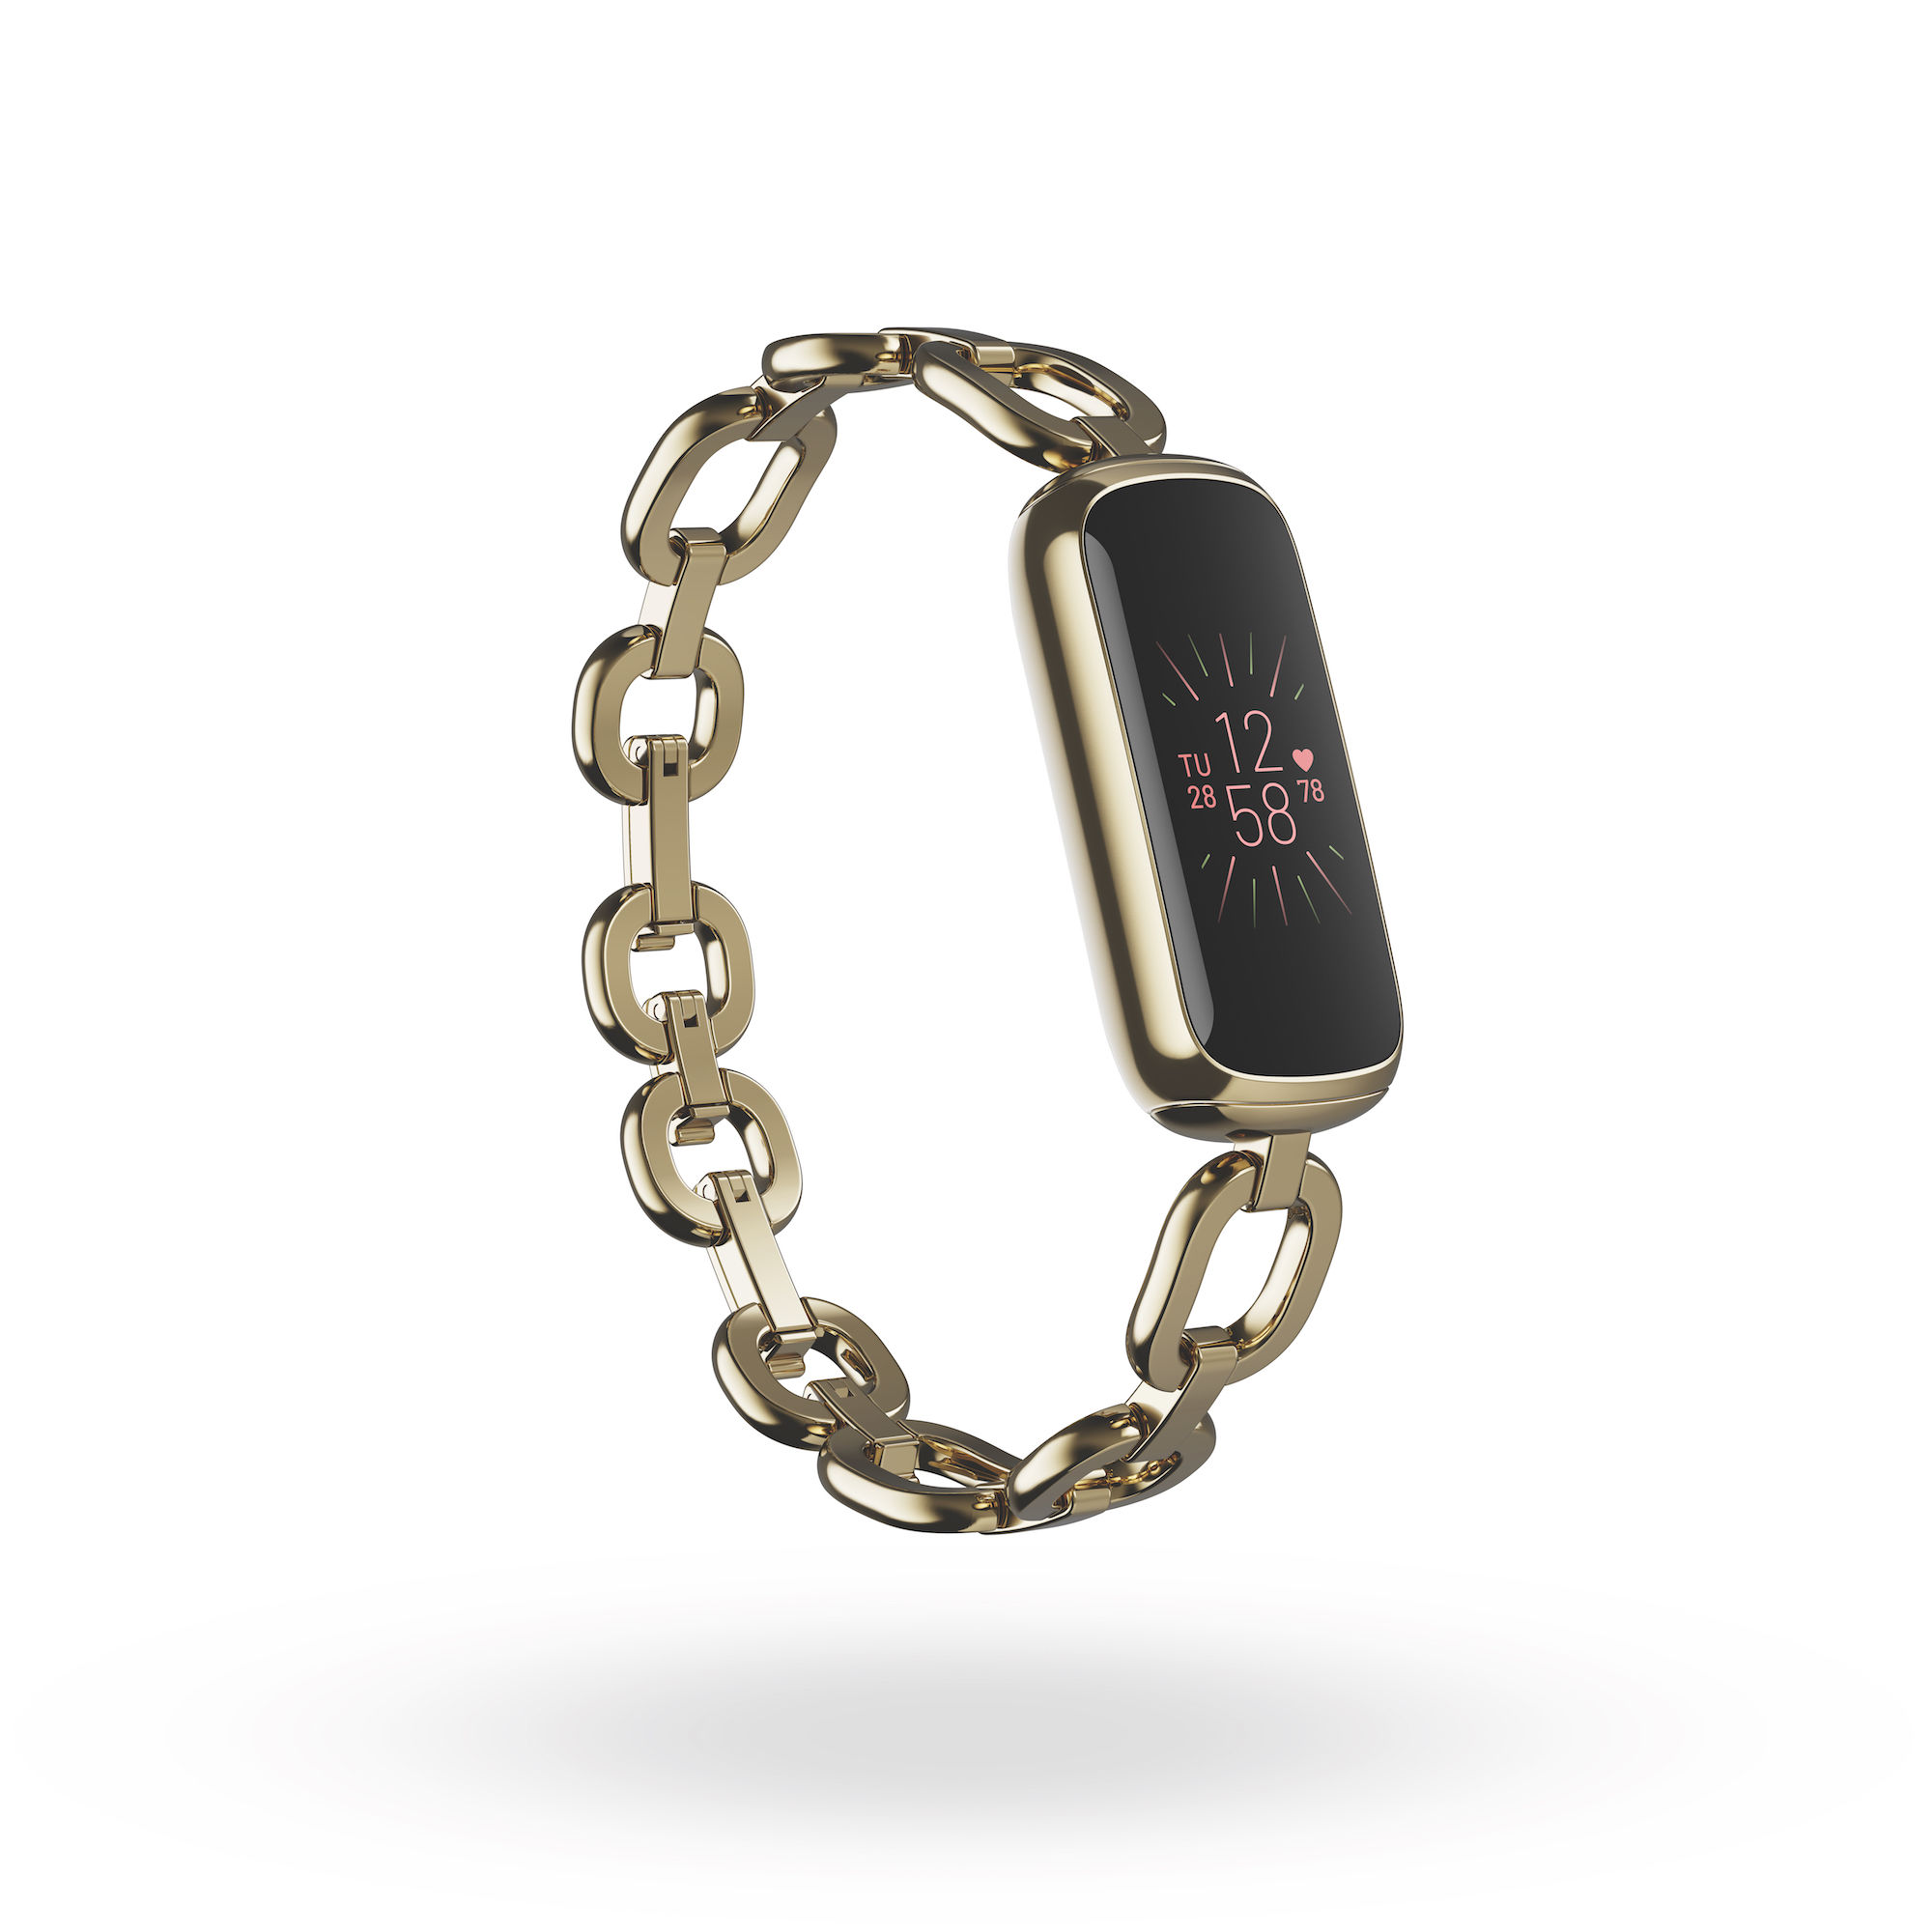 Fitbit Luxe review: Finally, a fitness tracker for the fashionable crowd